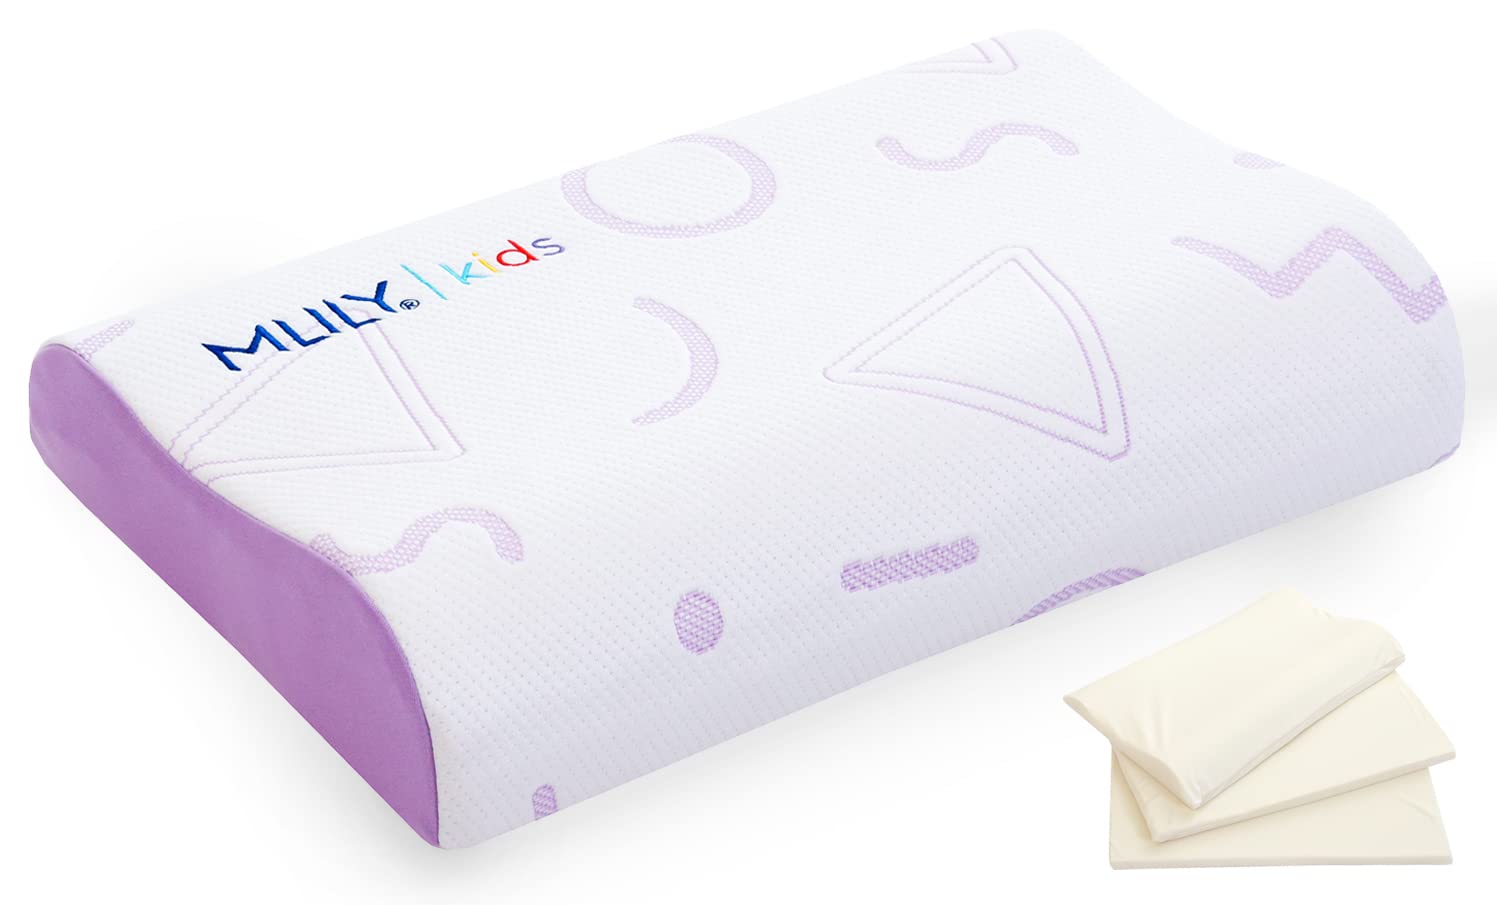 Kids’ Pillow for Sleeping | Adjustable Memory Foam Pillow for Neck Support